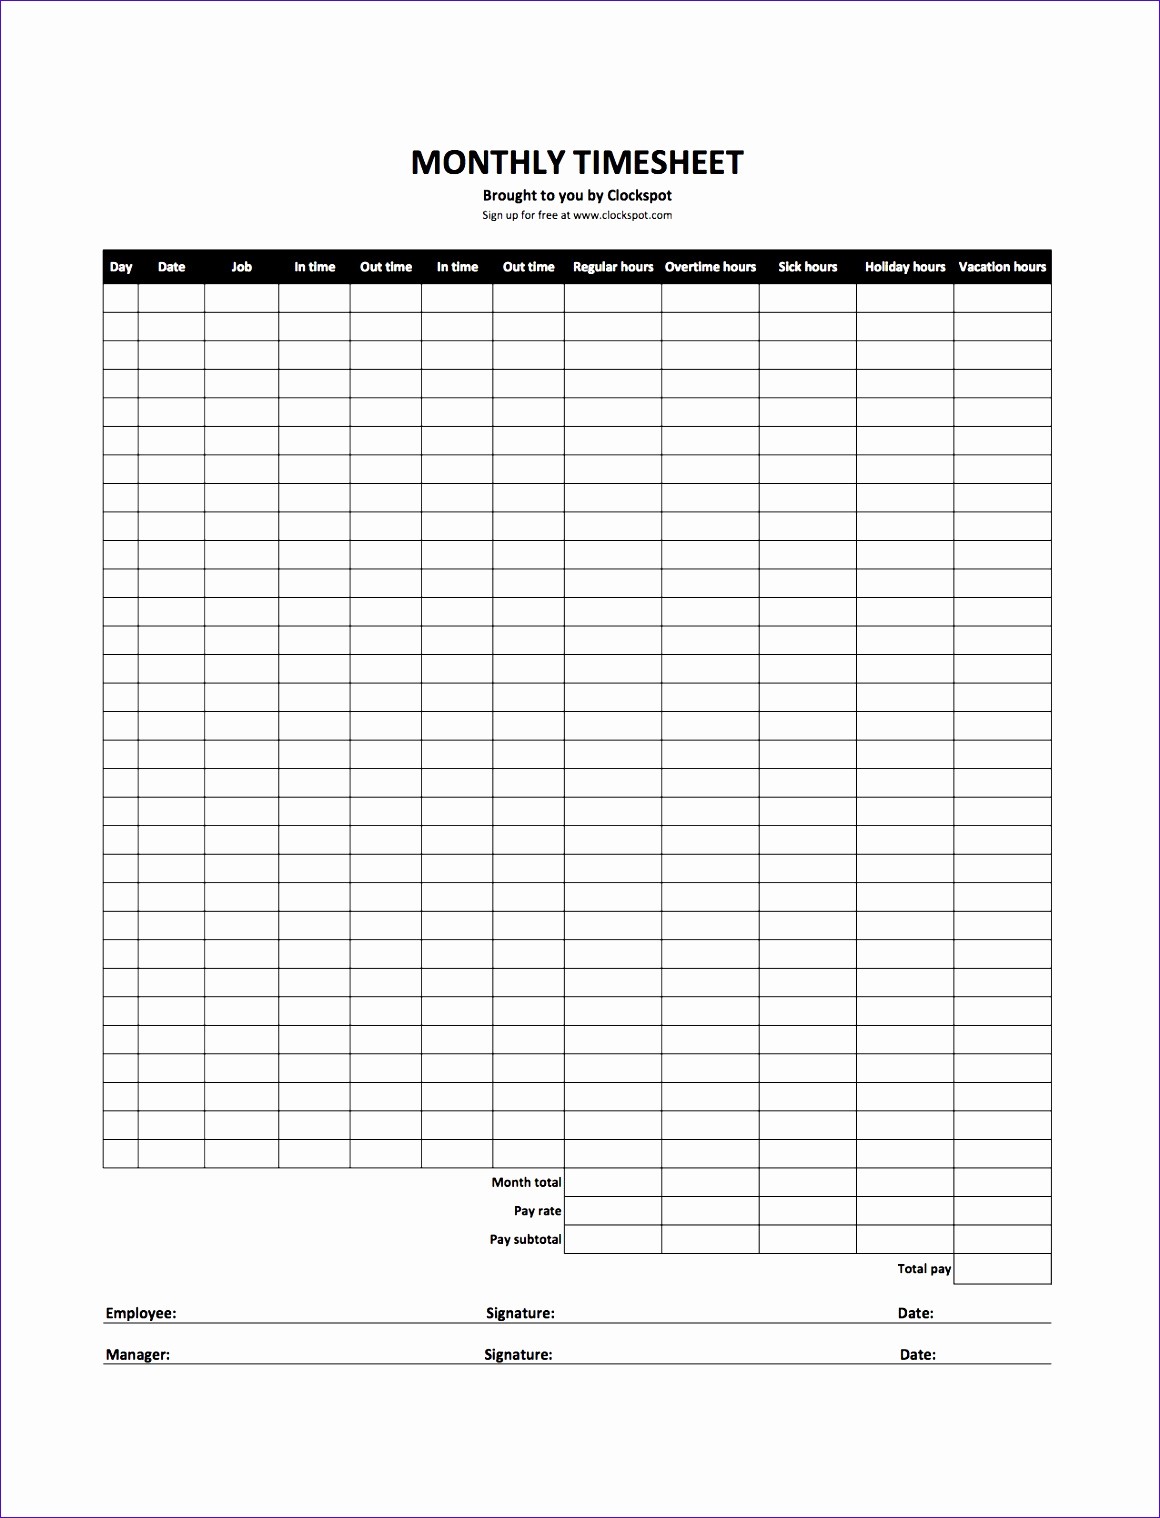 Employee Sign In Sheet Excel Awesome 6 Employee Sign In Sheet Template Excel Exceltemplates